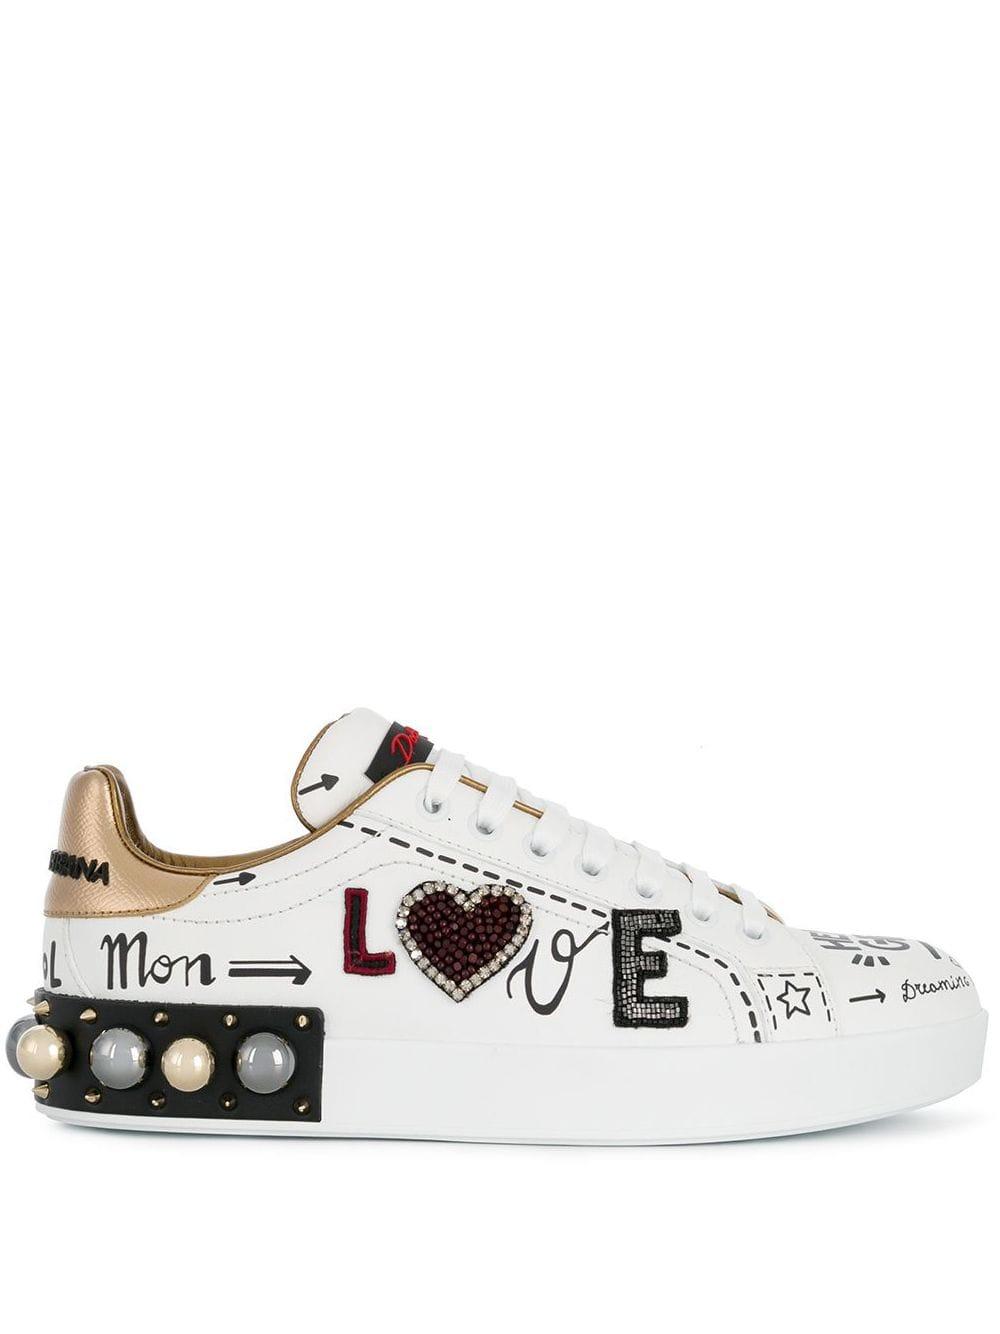 Dolce & Gabbana Leather Embroidered Appliqué Sneakers in White - Save 7 ...